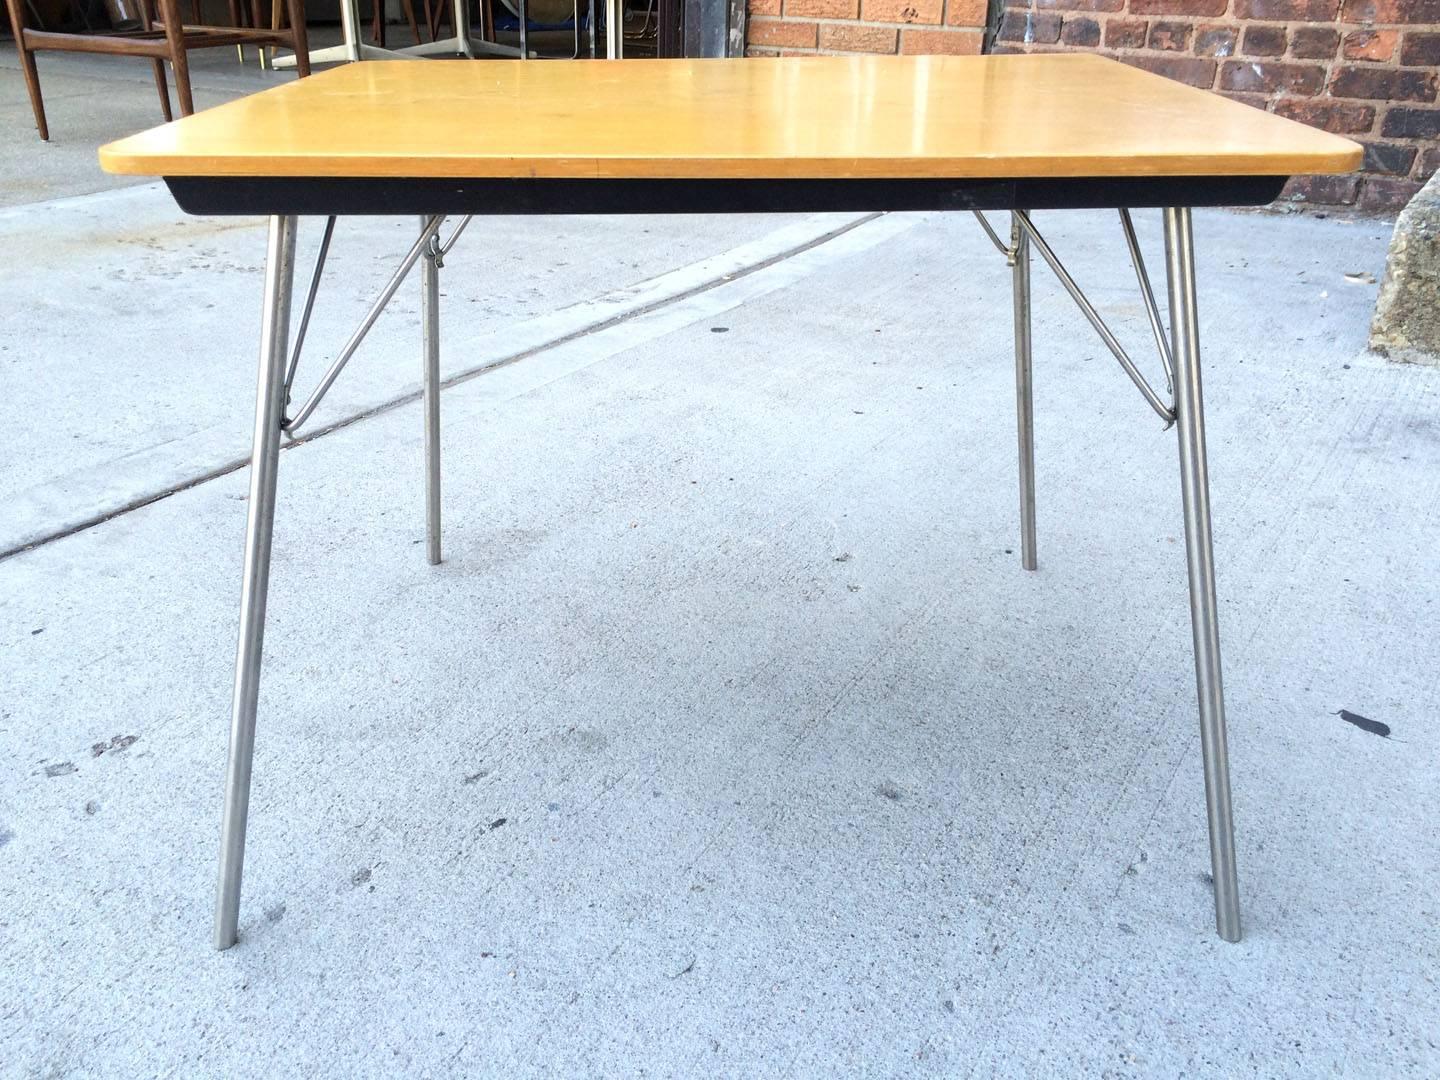 Rare Herman Miller Eames IT-1 Incidental folding table. Birch top. Very good condition from early 1950s with original label. Normal wear commensurate with age and use.